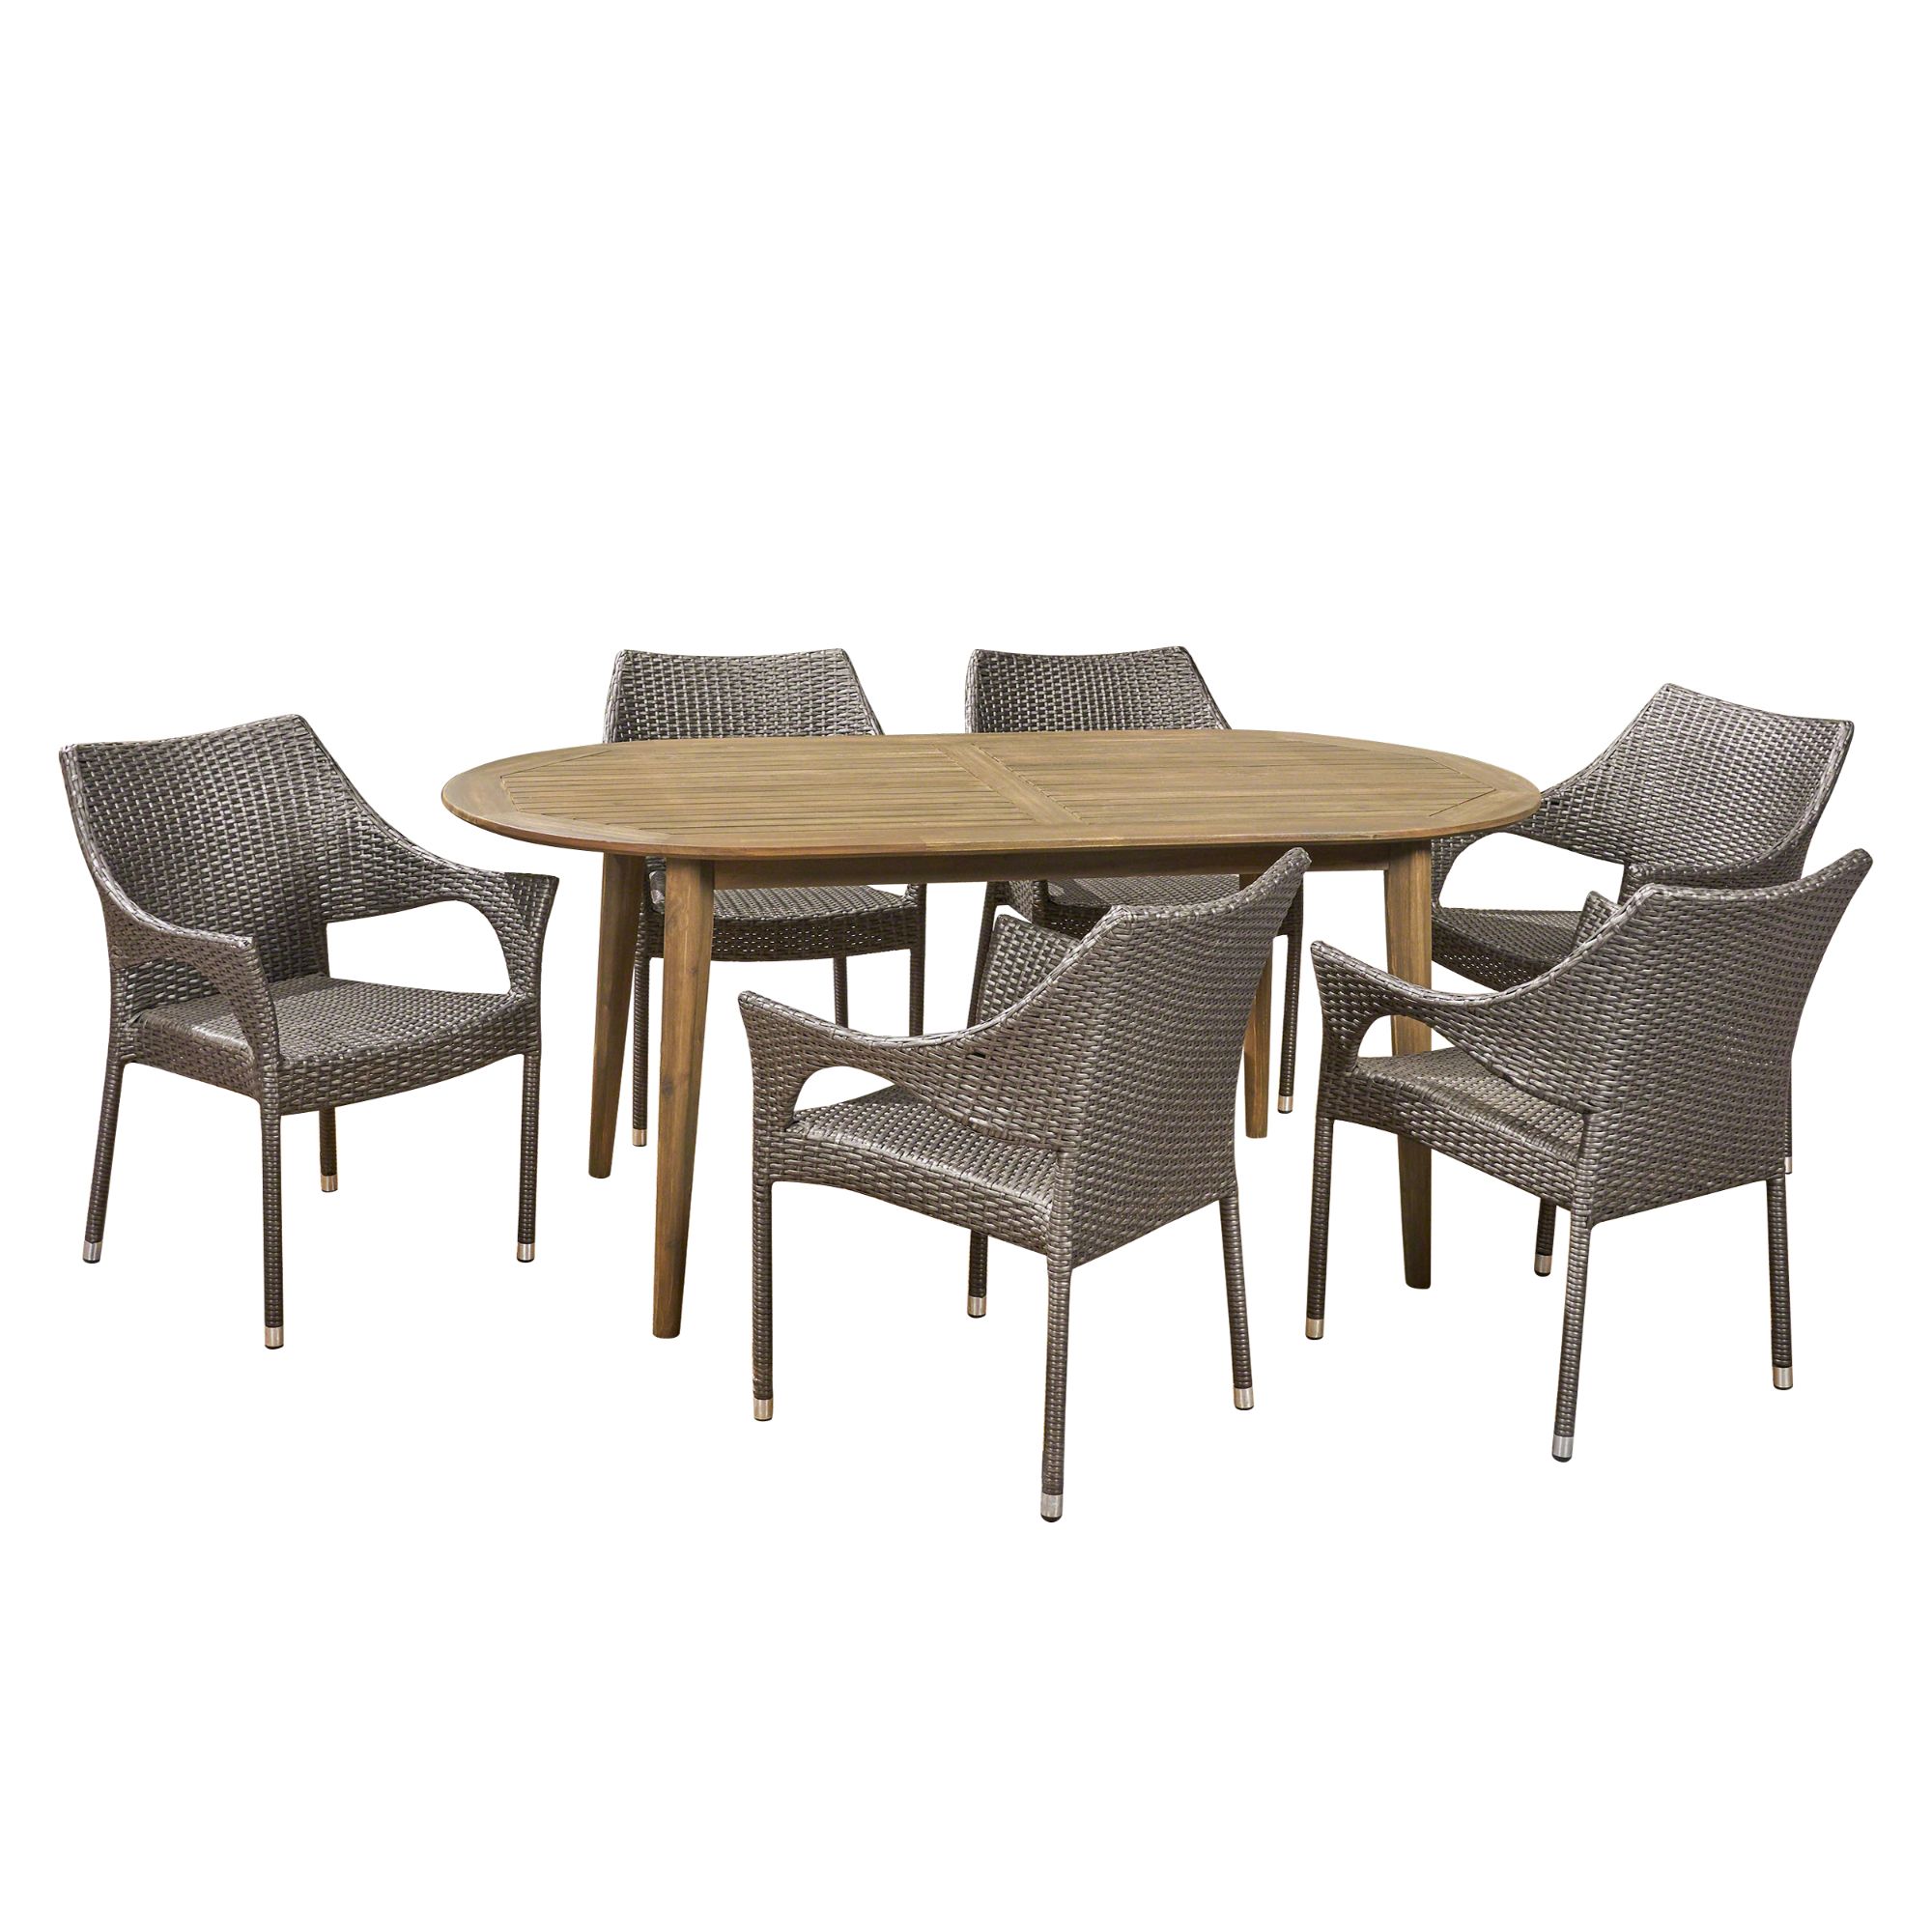 Noble House Fayette 7 Piece Wooden Oval Patio Dining Set in Gray - image 1 of 7